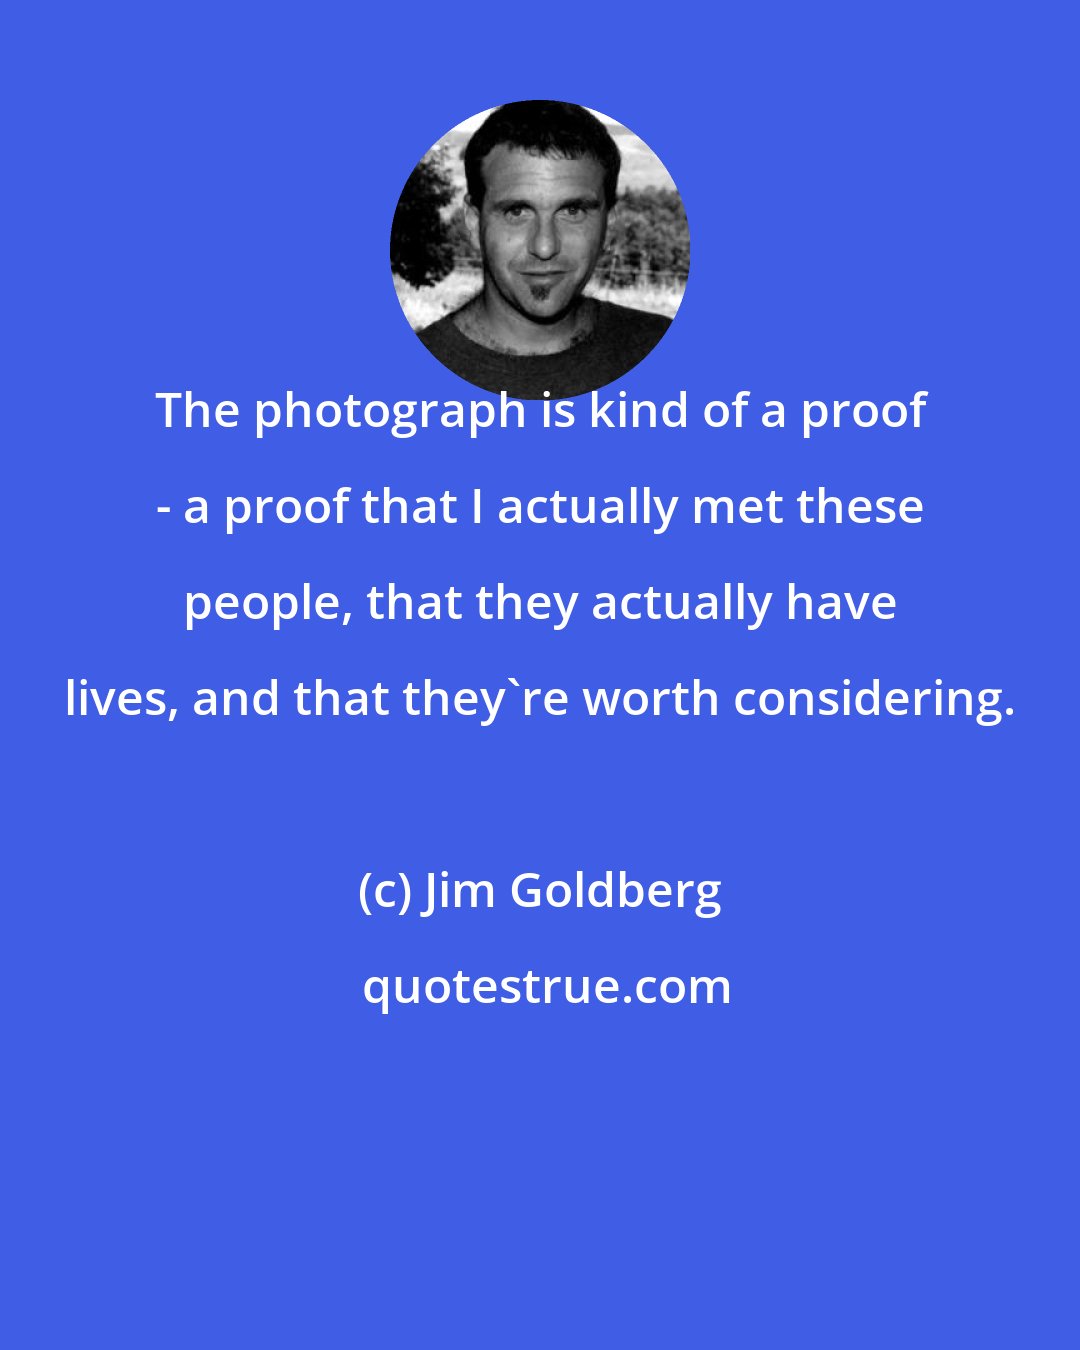 Jim Goldberg: The photograph is kind of a proof - a proof that I actually met these people, that they actually have lives, and that they're worth considering.